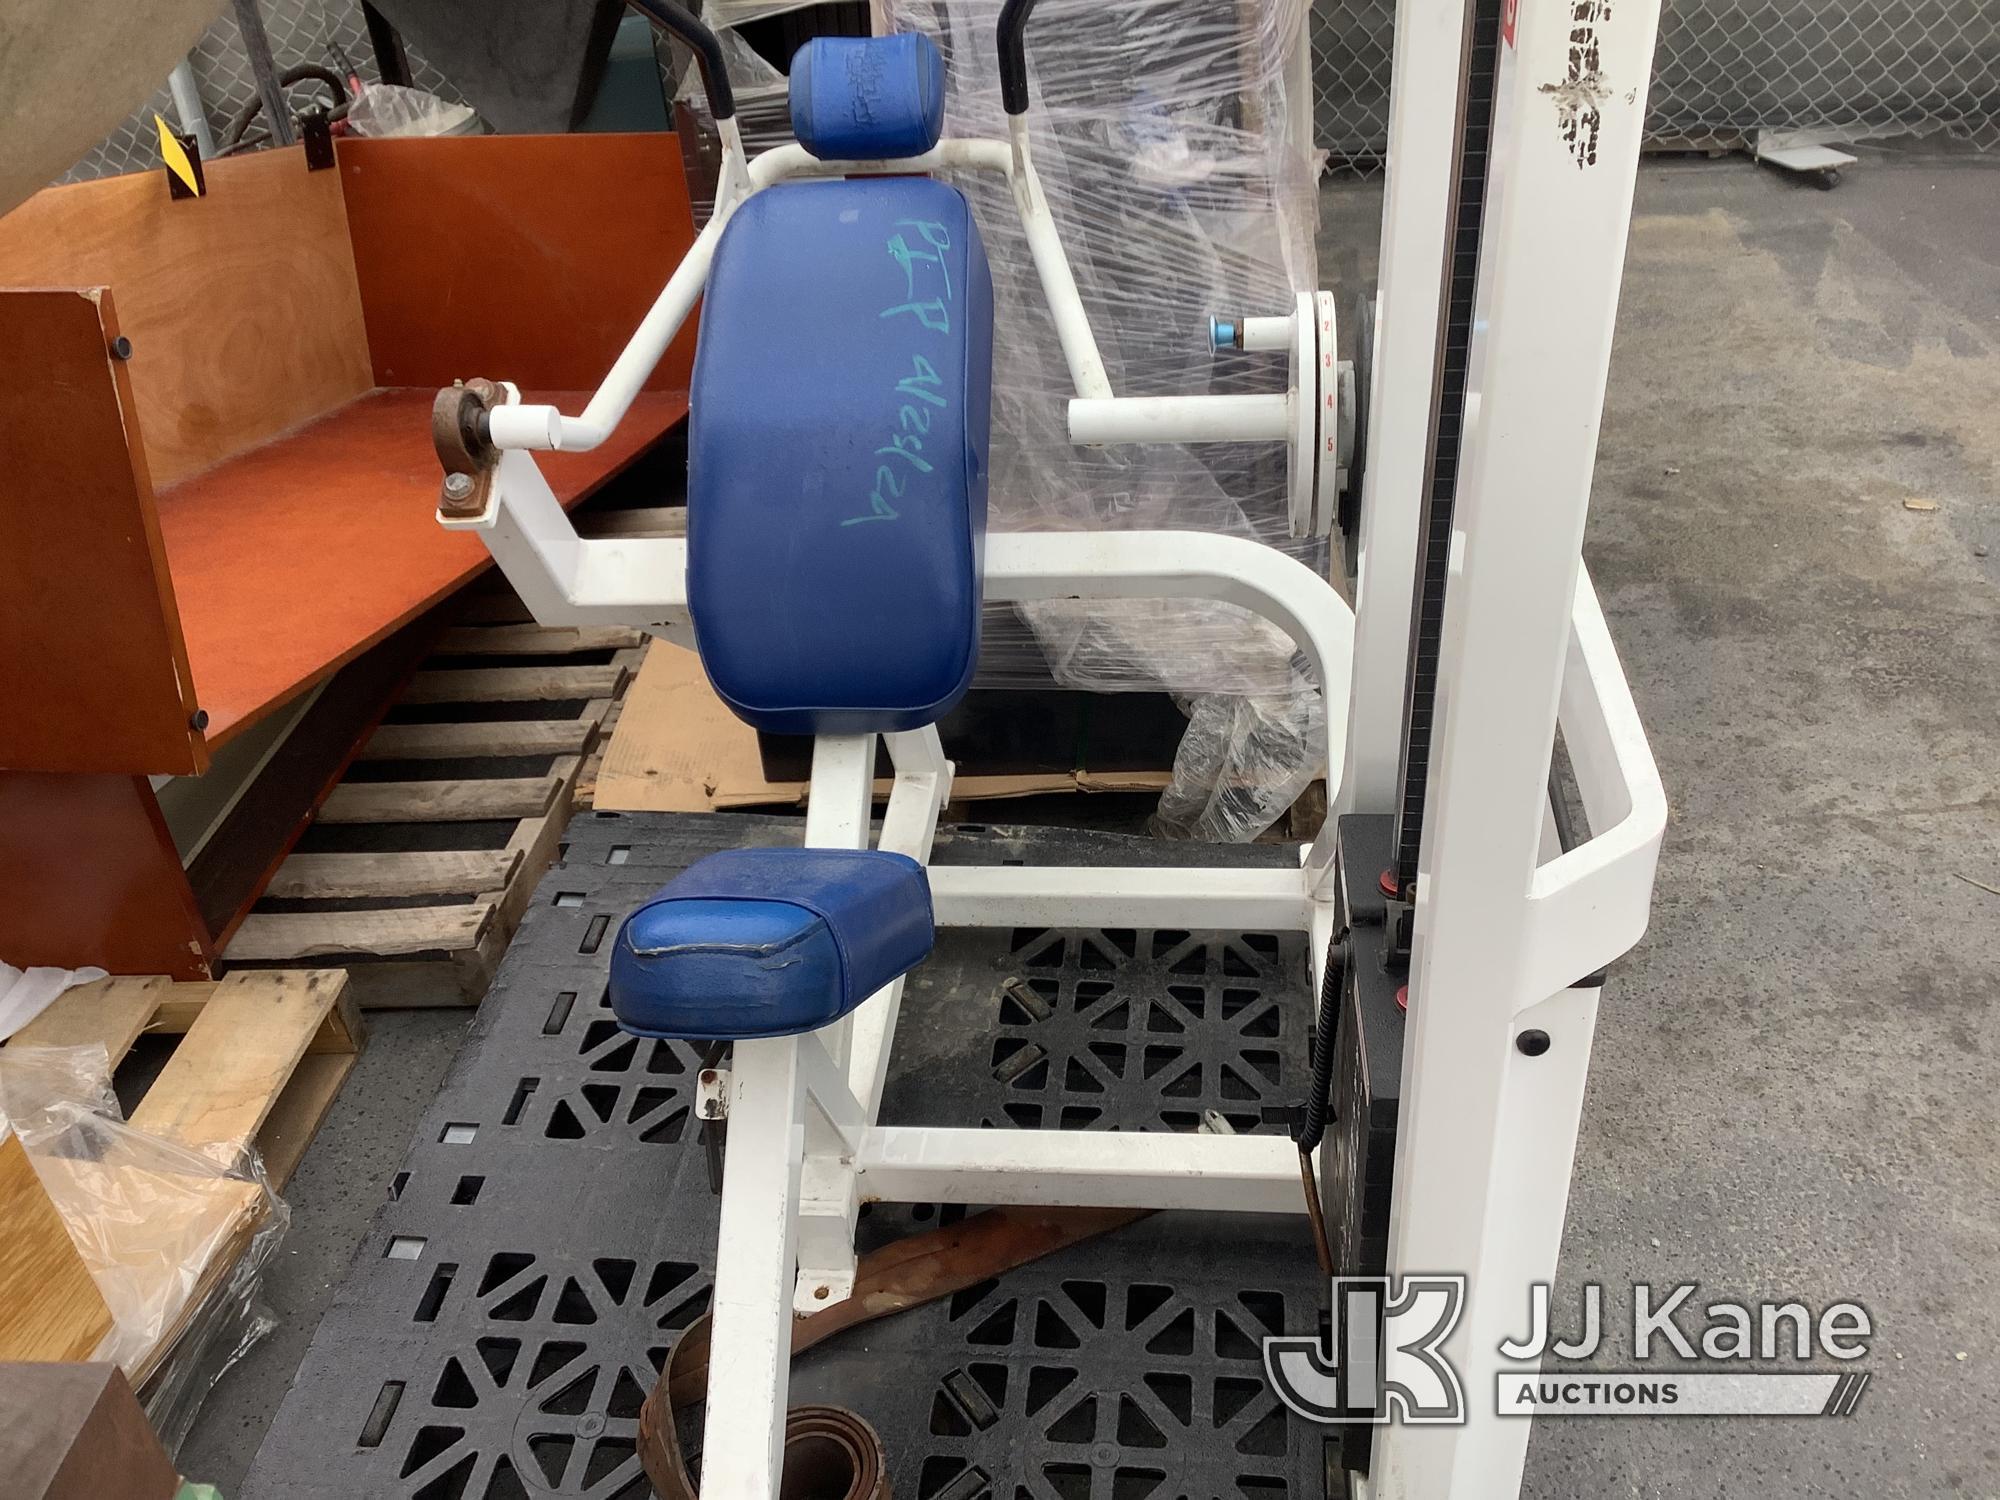 (Jurupa Valley, CA) 1 Flex Fitness AB Machine (Used) NOTE: This unit is being sold AS IS/WHERE IS vi